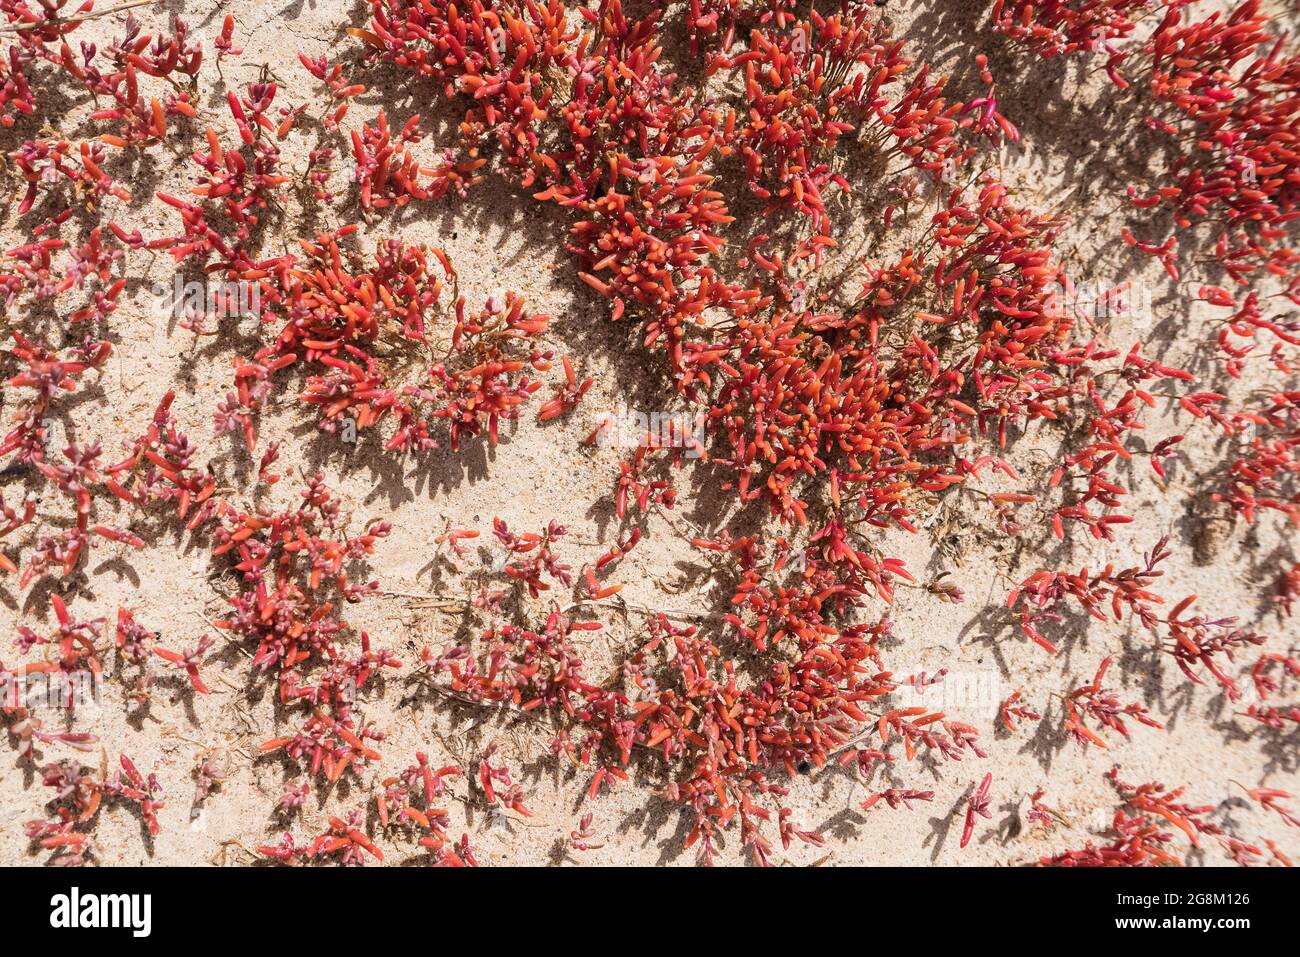 view from above on red glasswort colony growing in sand on sunny day Stock Photo